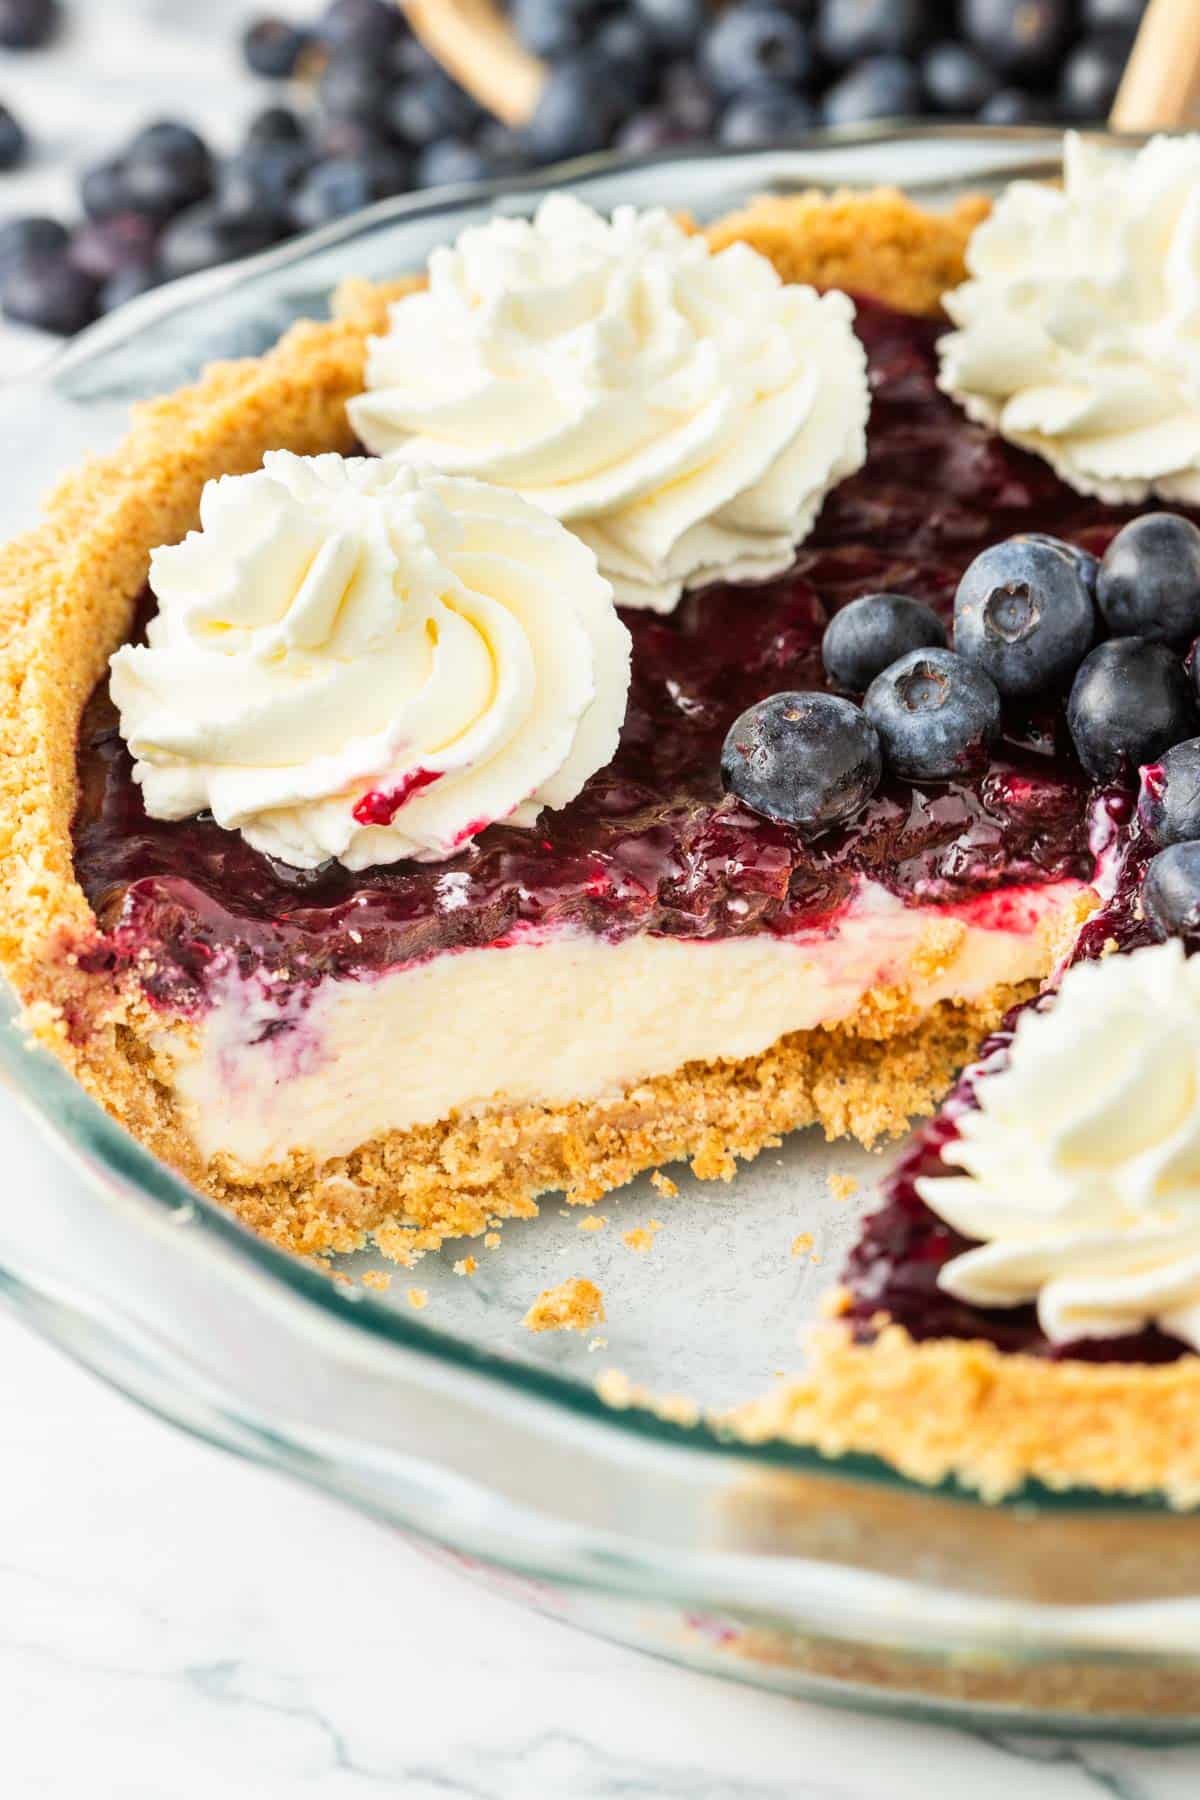 A blueberry pie with cheesecake filling with a slice removed.